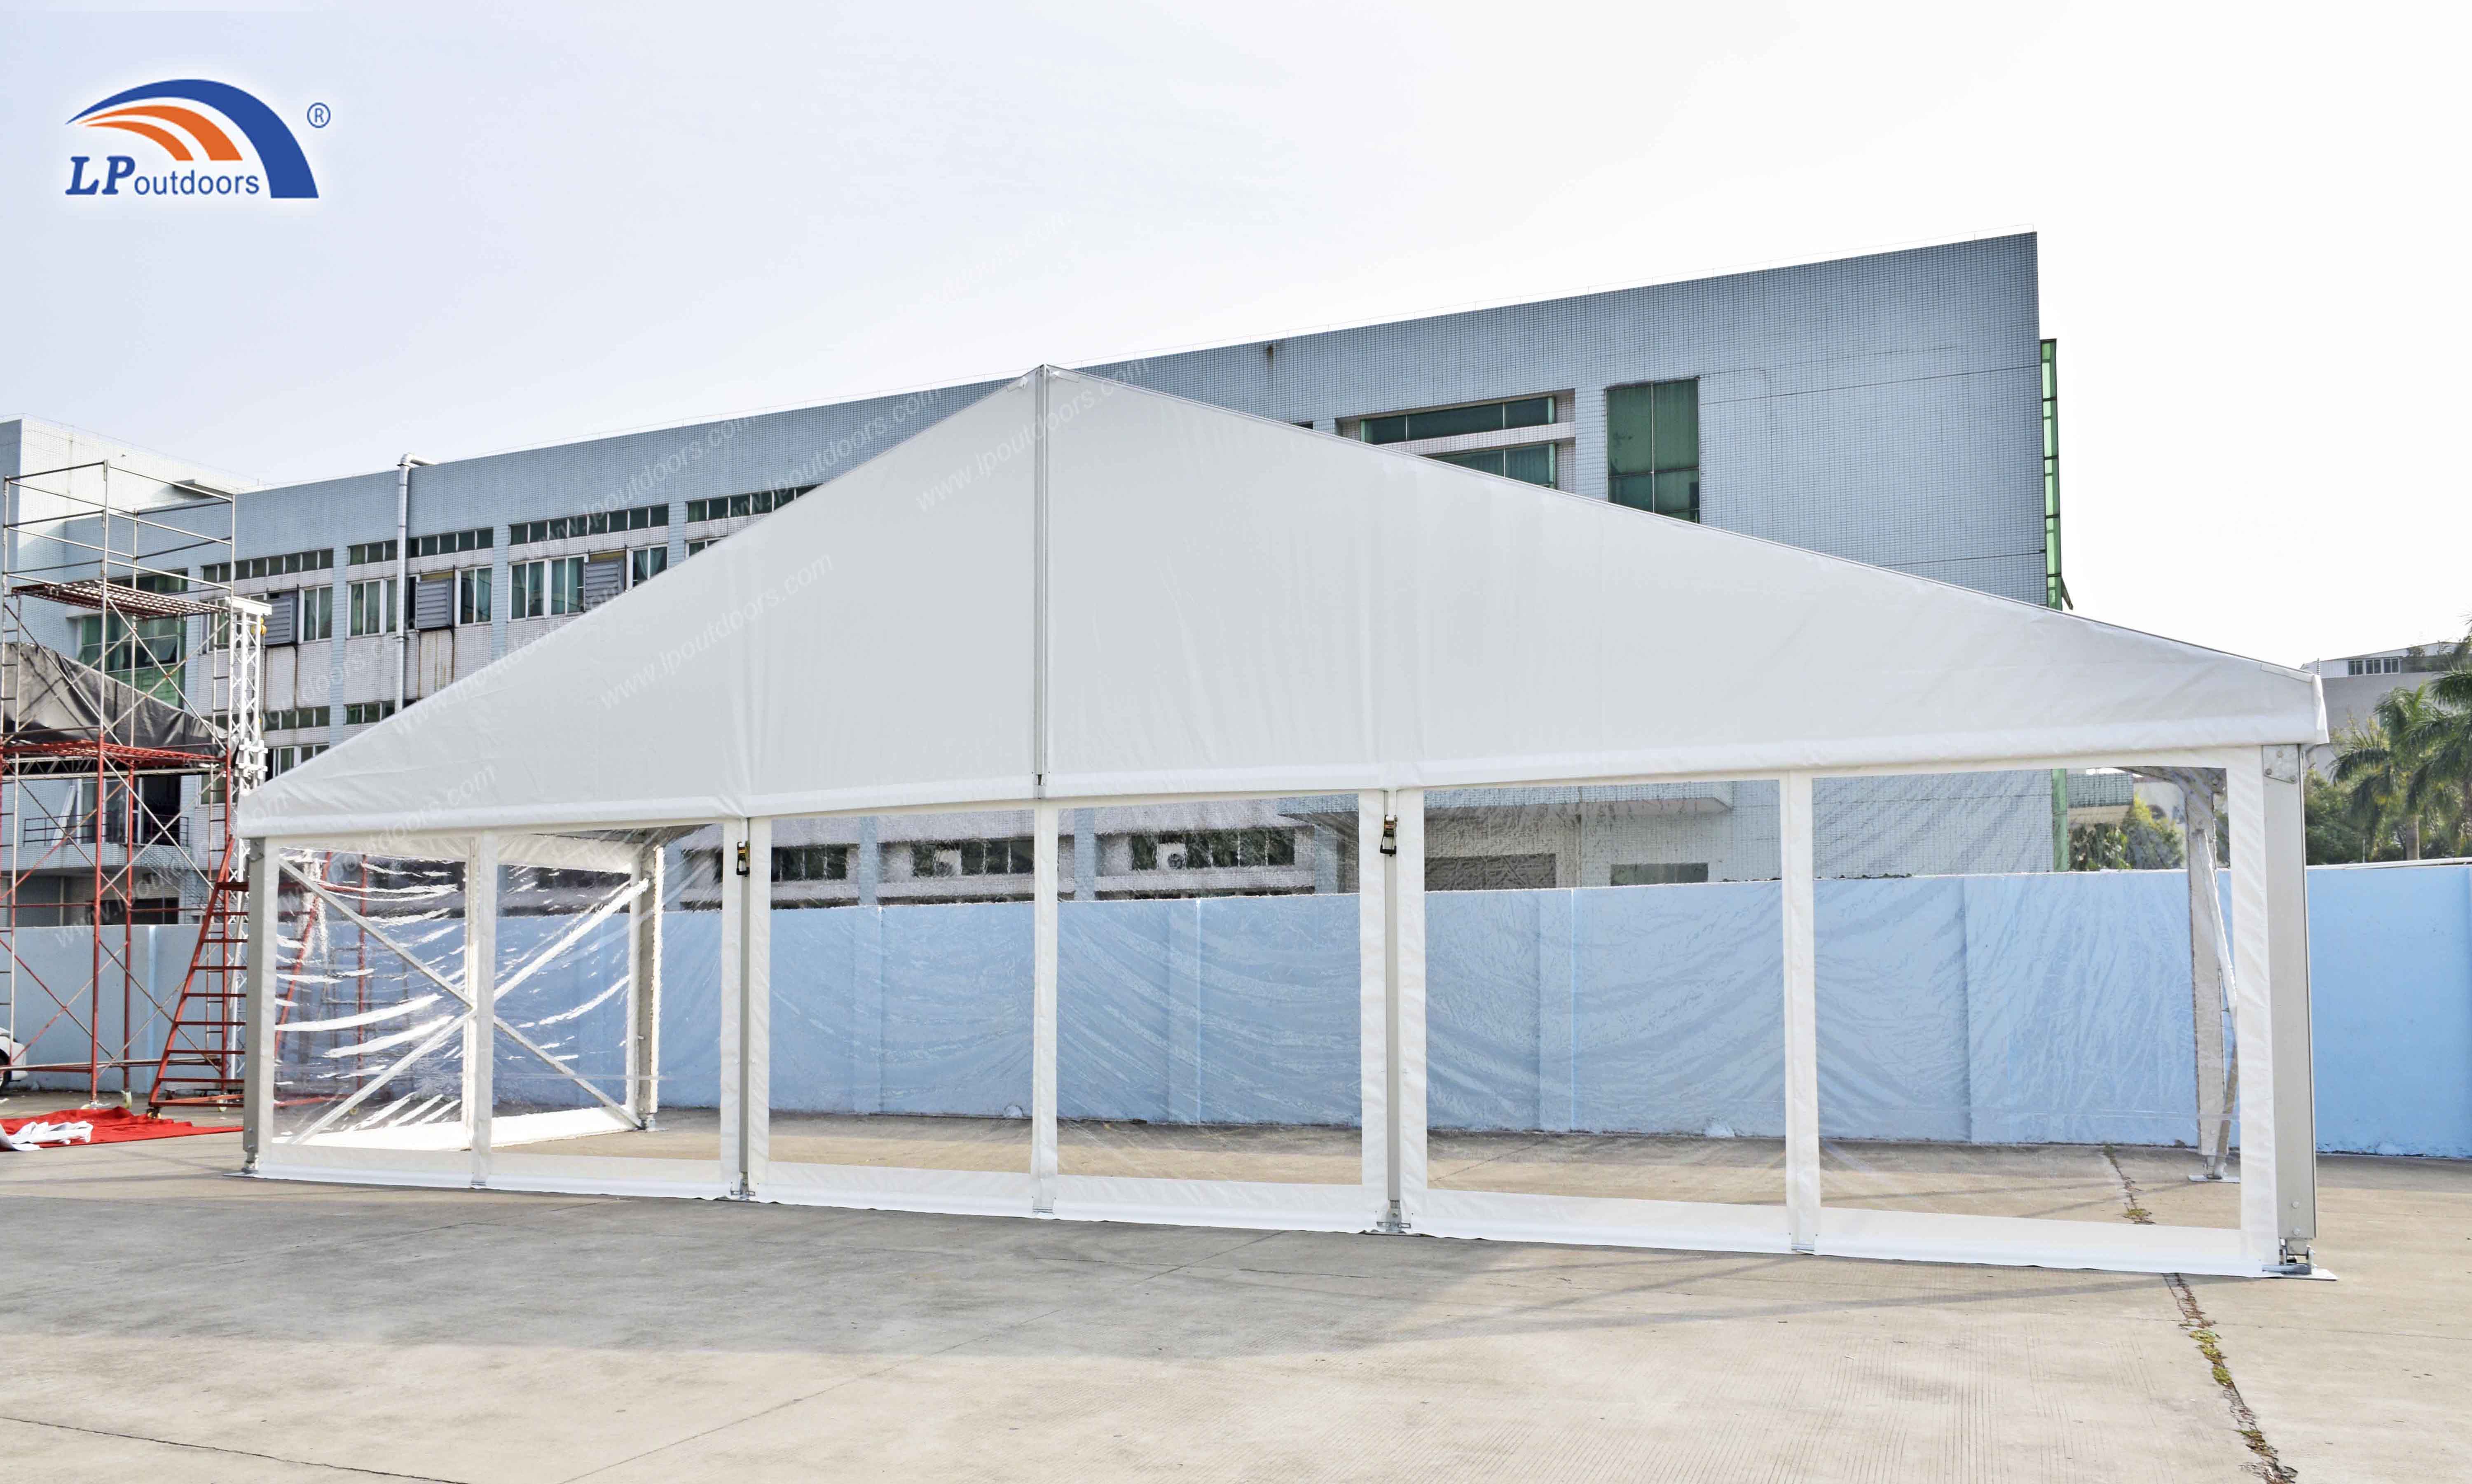 15m clear span transparent window waterproof exhibition tent for outdoors event.jpg